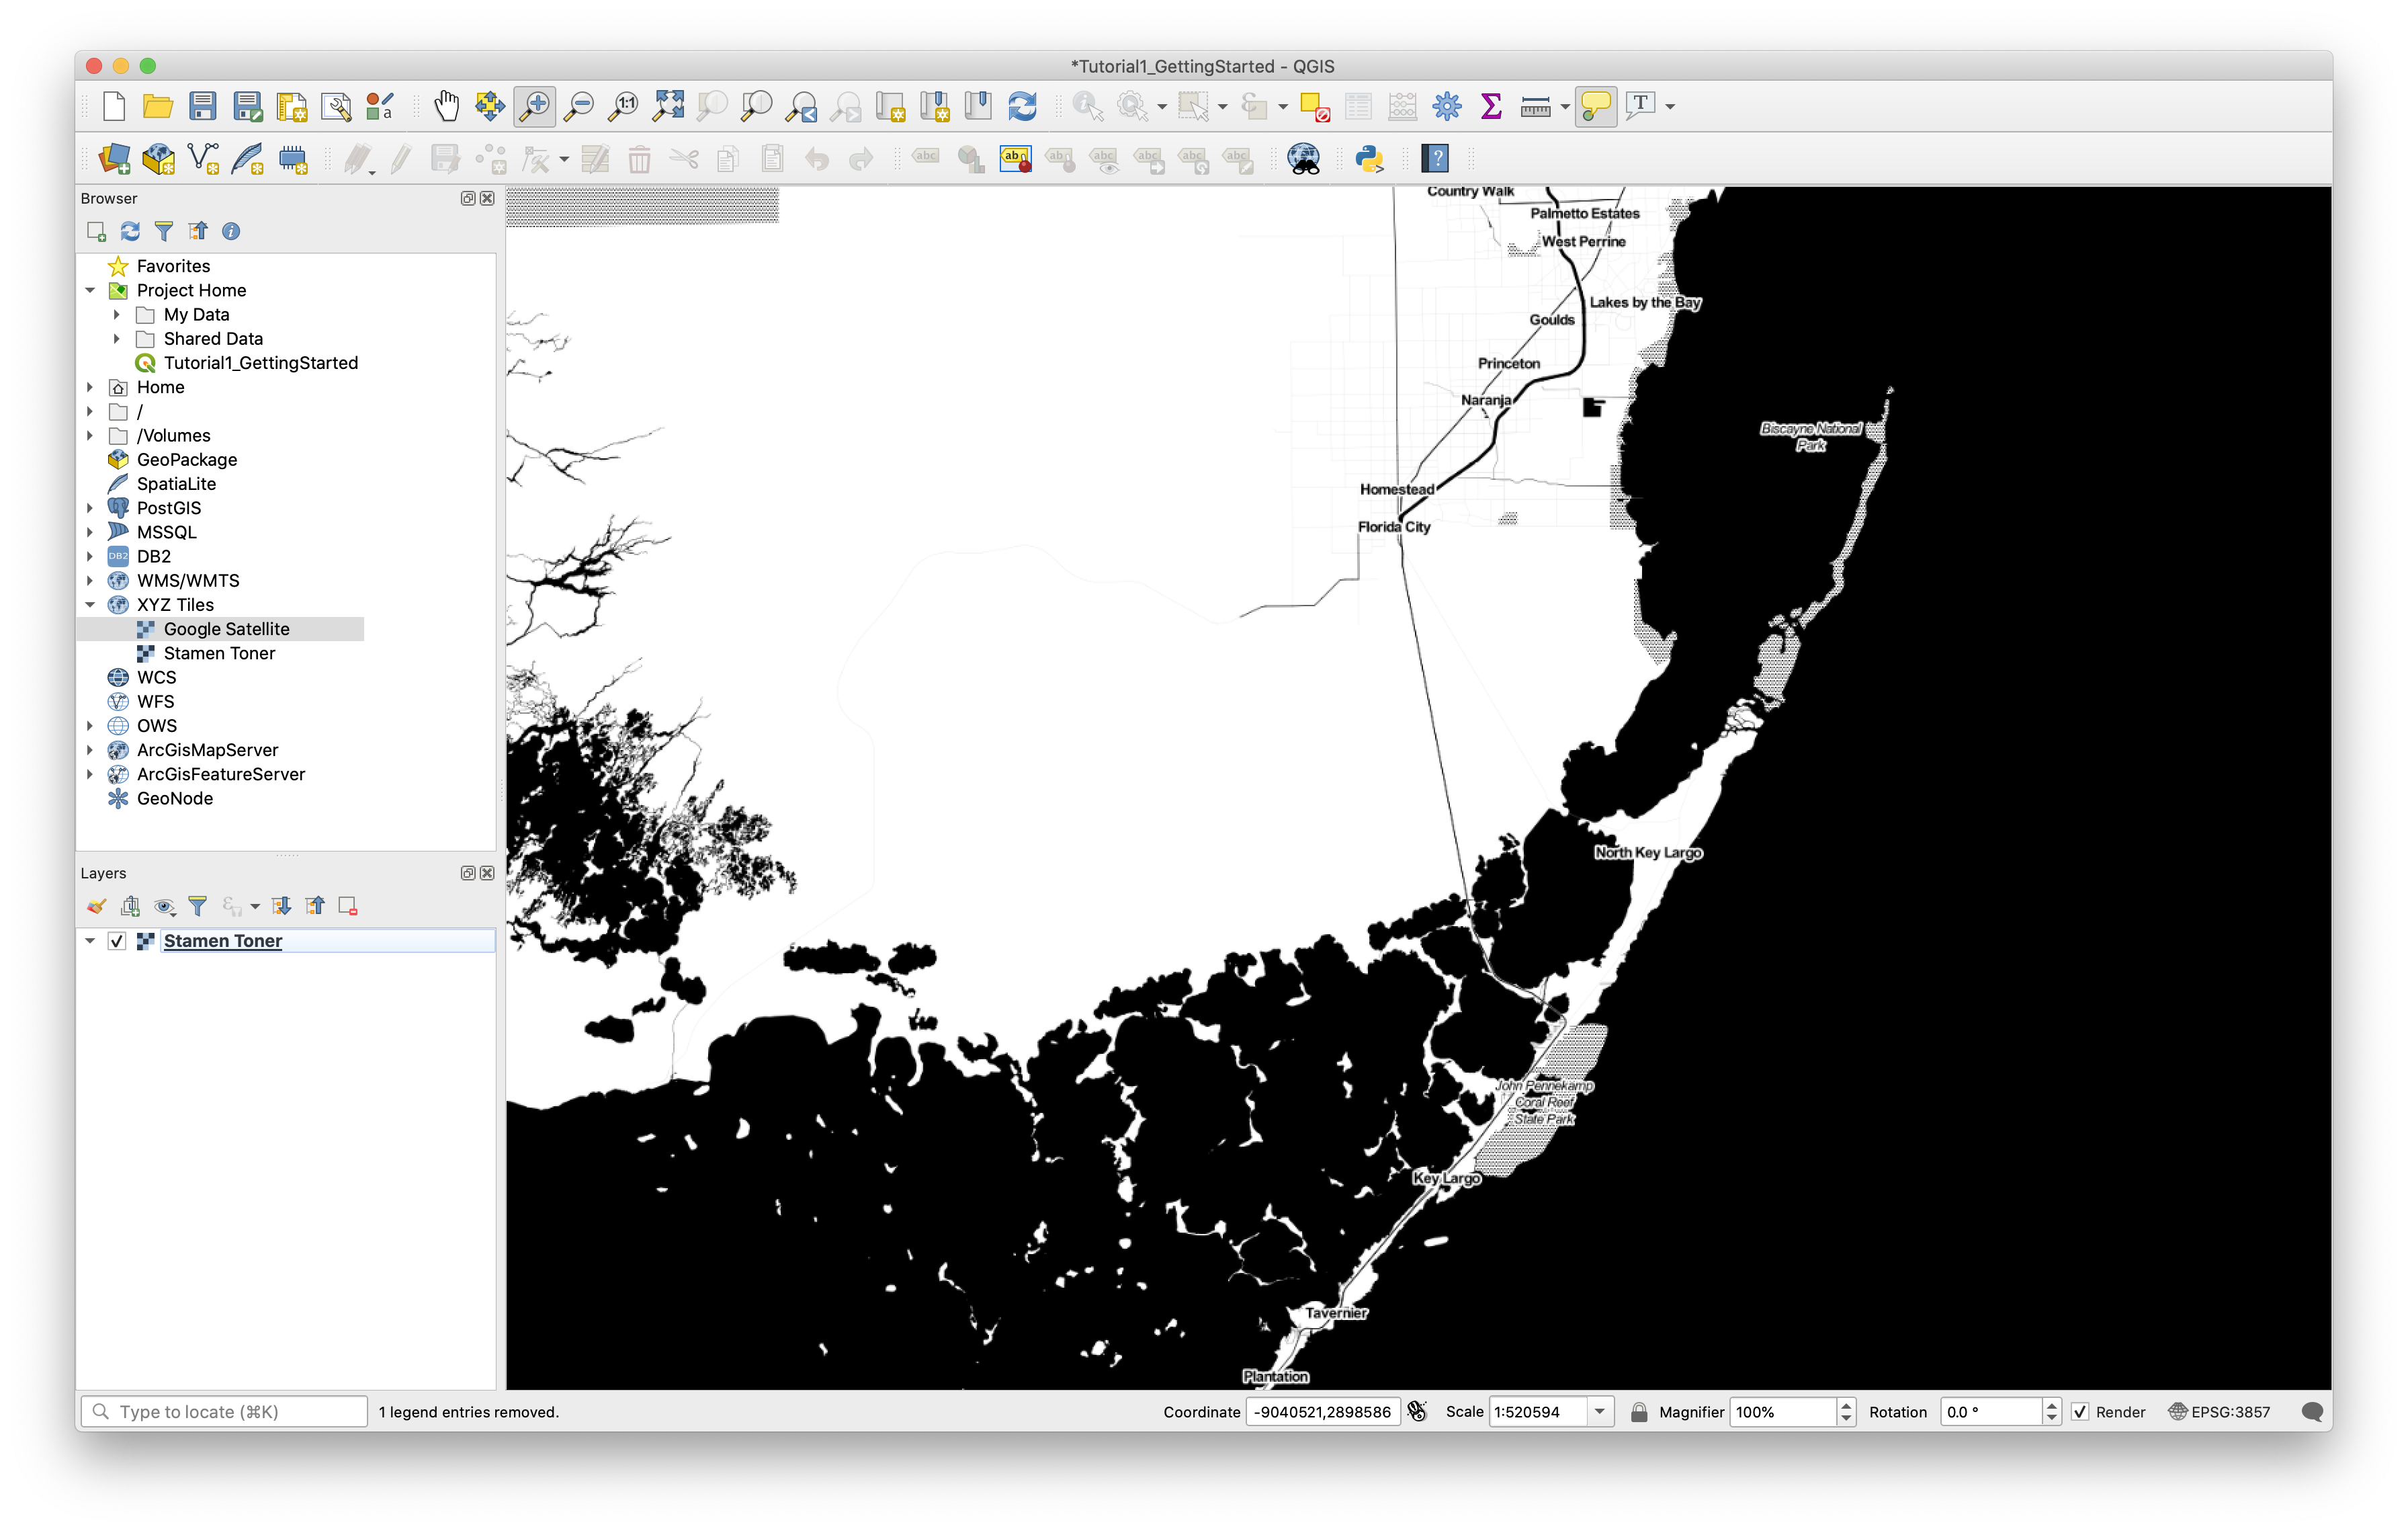 qgis view with data from tileserver